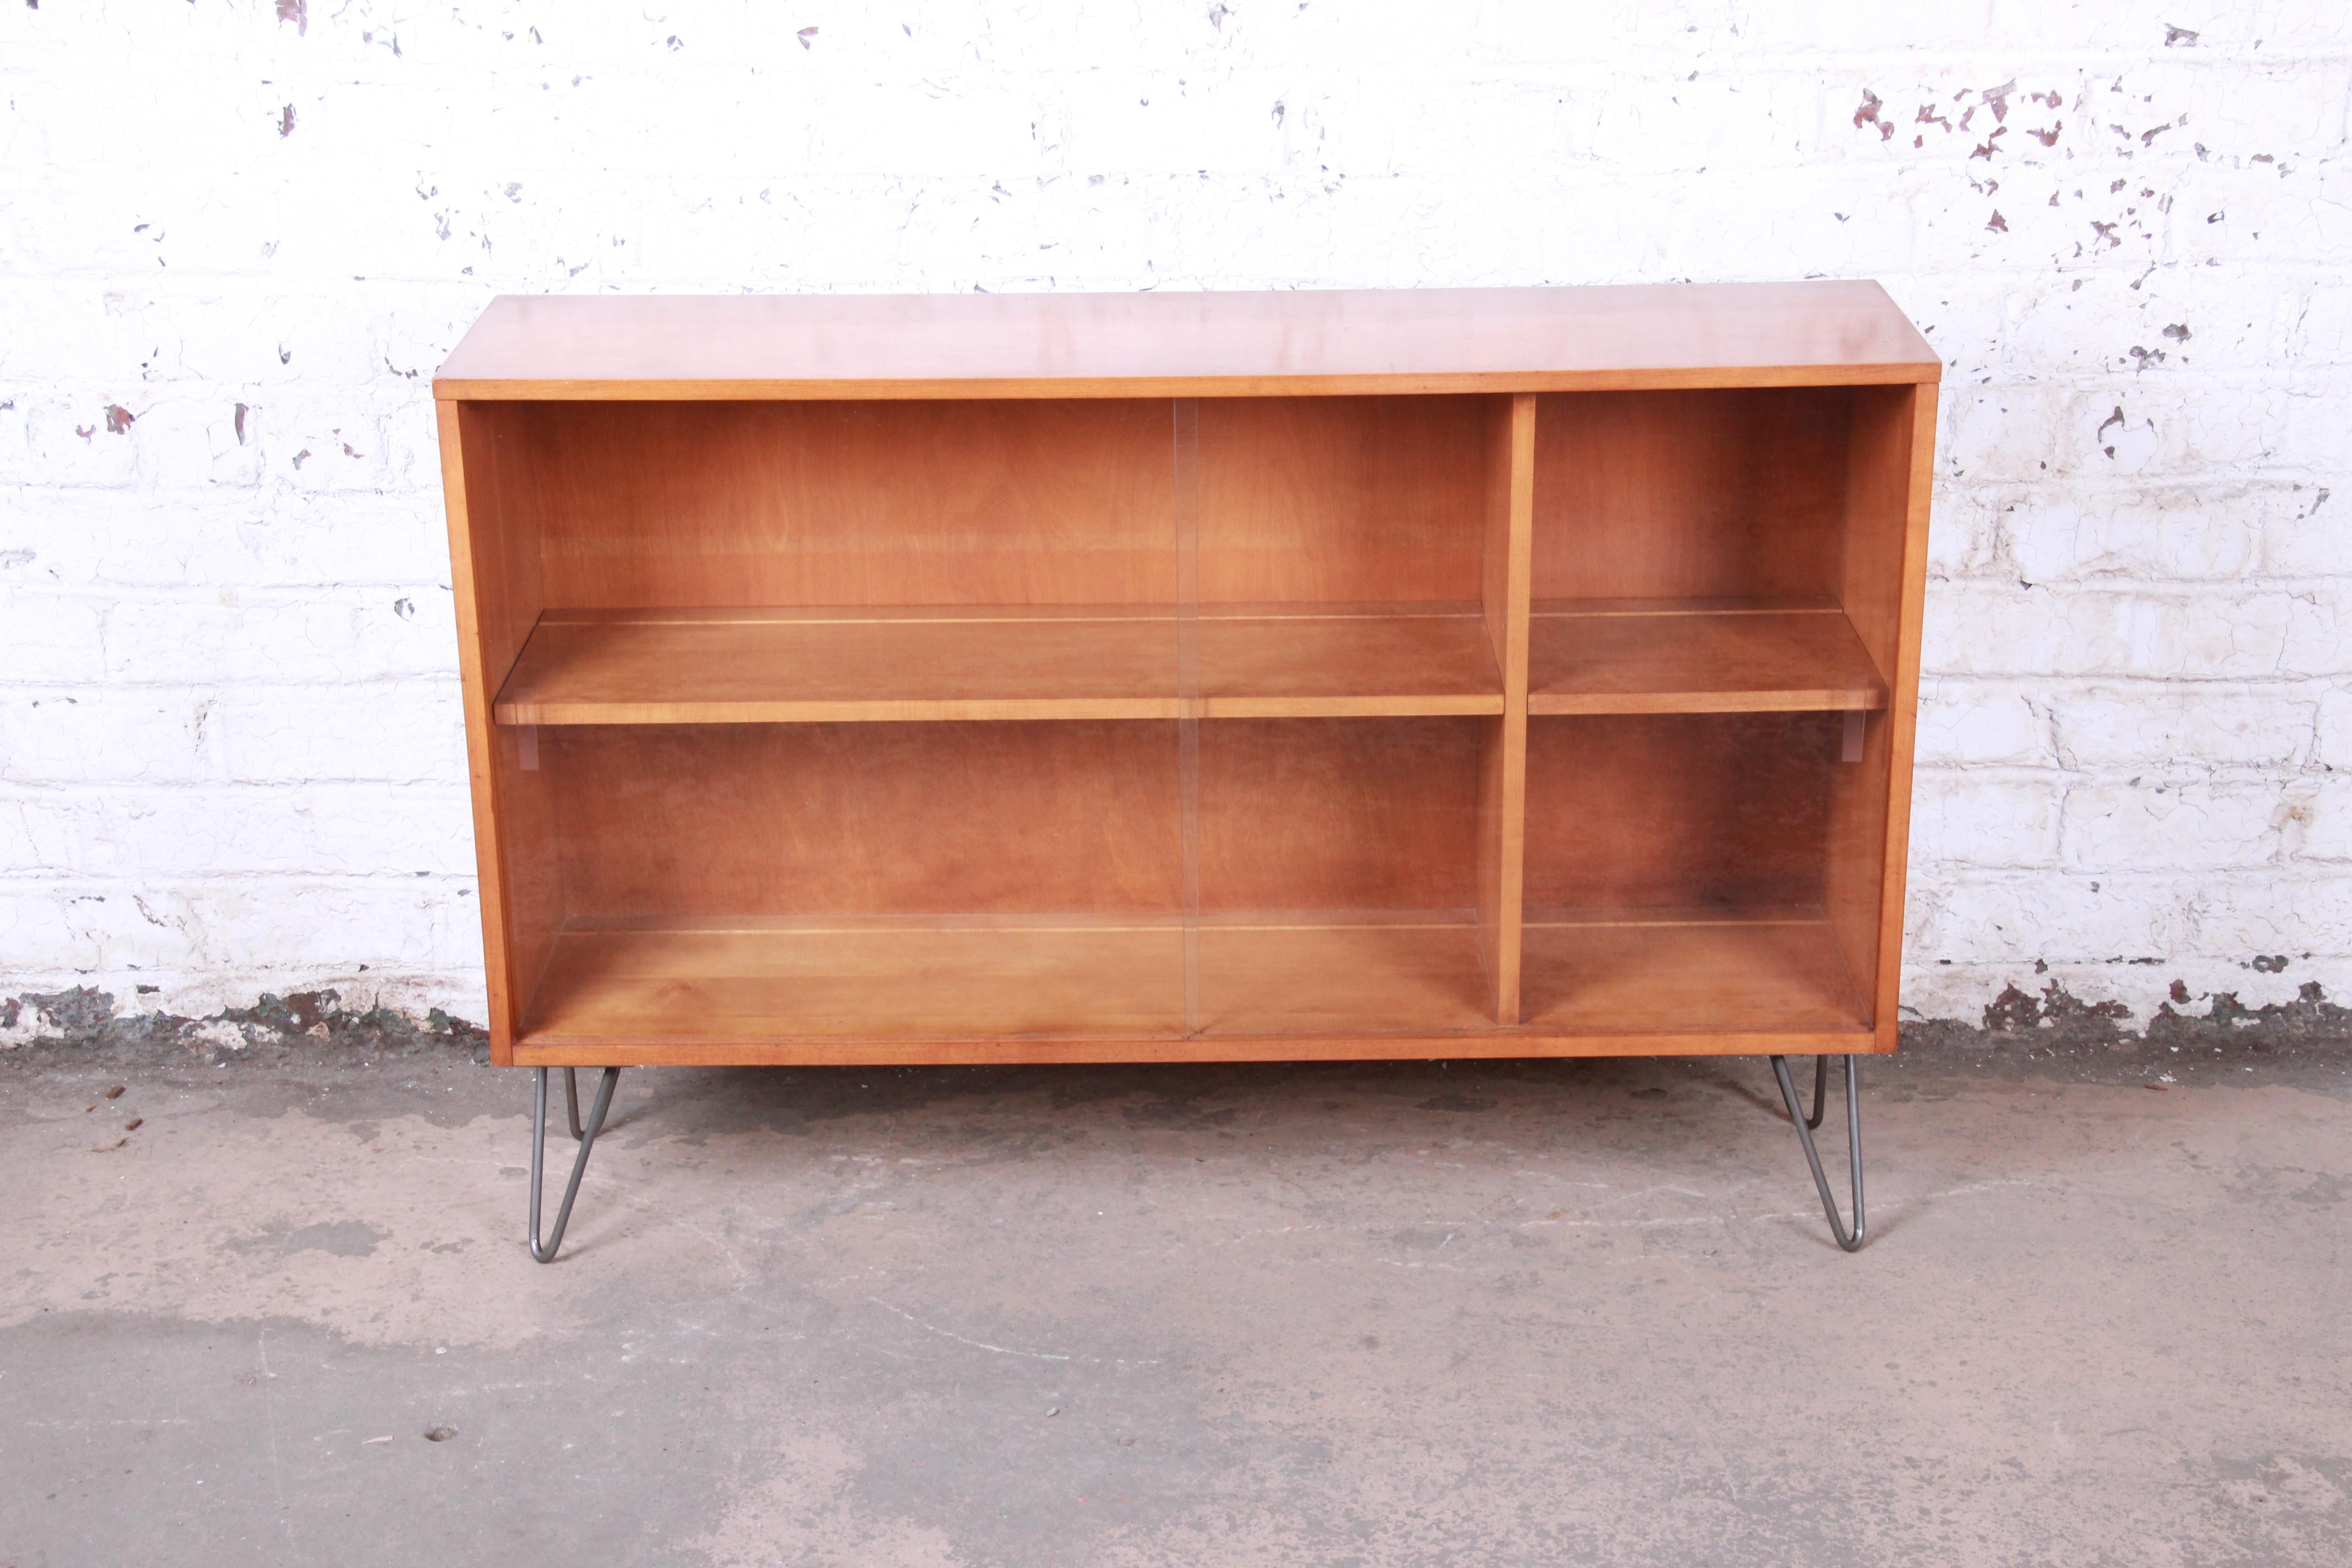 A sleek and stylish Mid-Century Modern glass front credenza or bookcase

Designed by Paul McCobb for Winchendon Furniture 